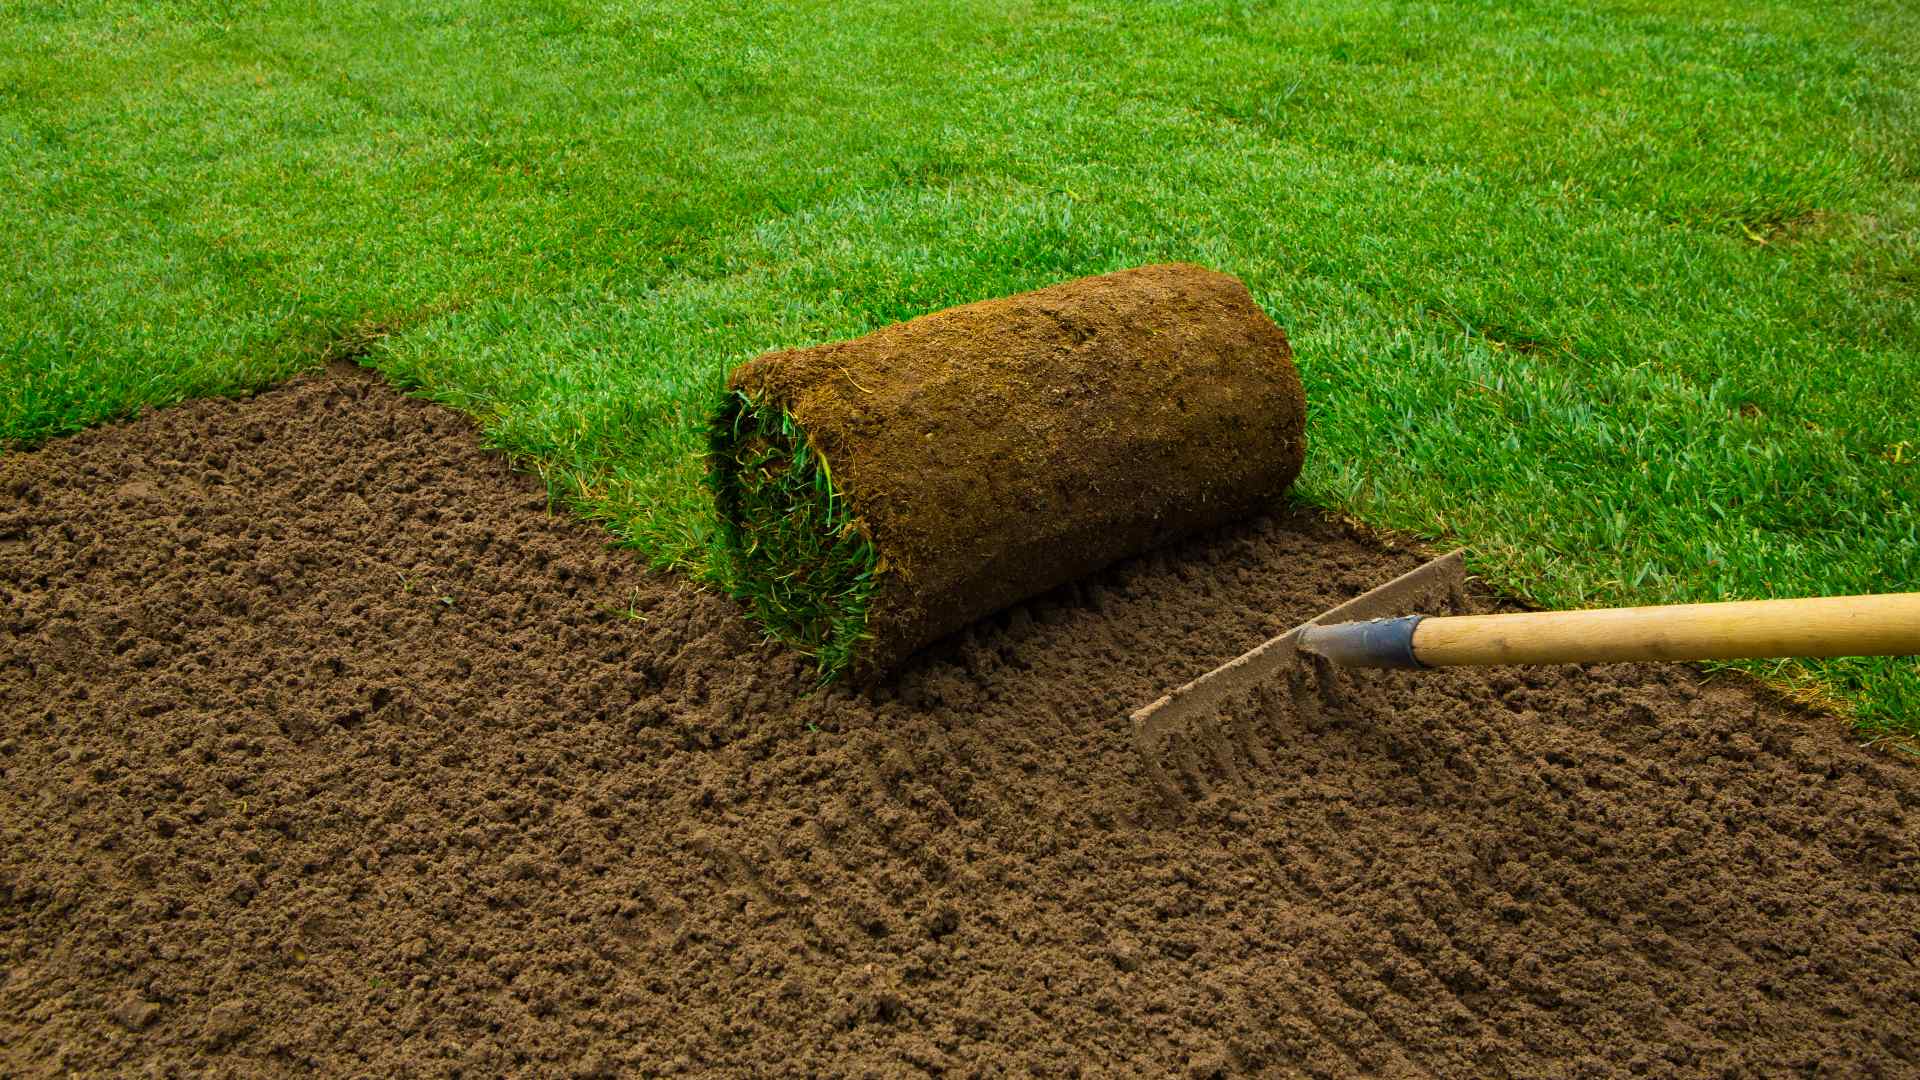 How Long Do You Have To Wait Before Walking on Newly Installed Sod?